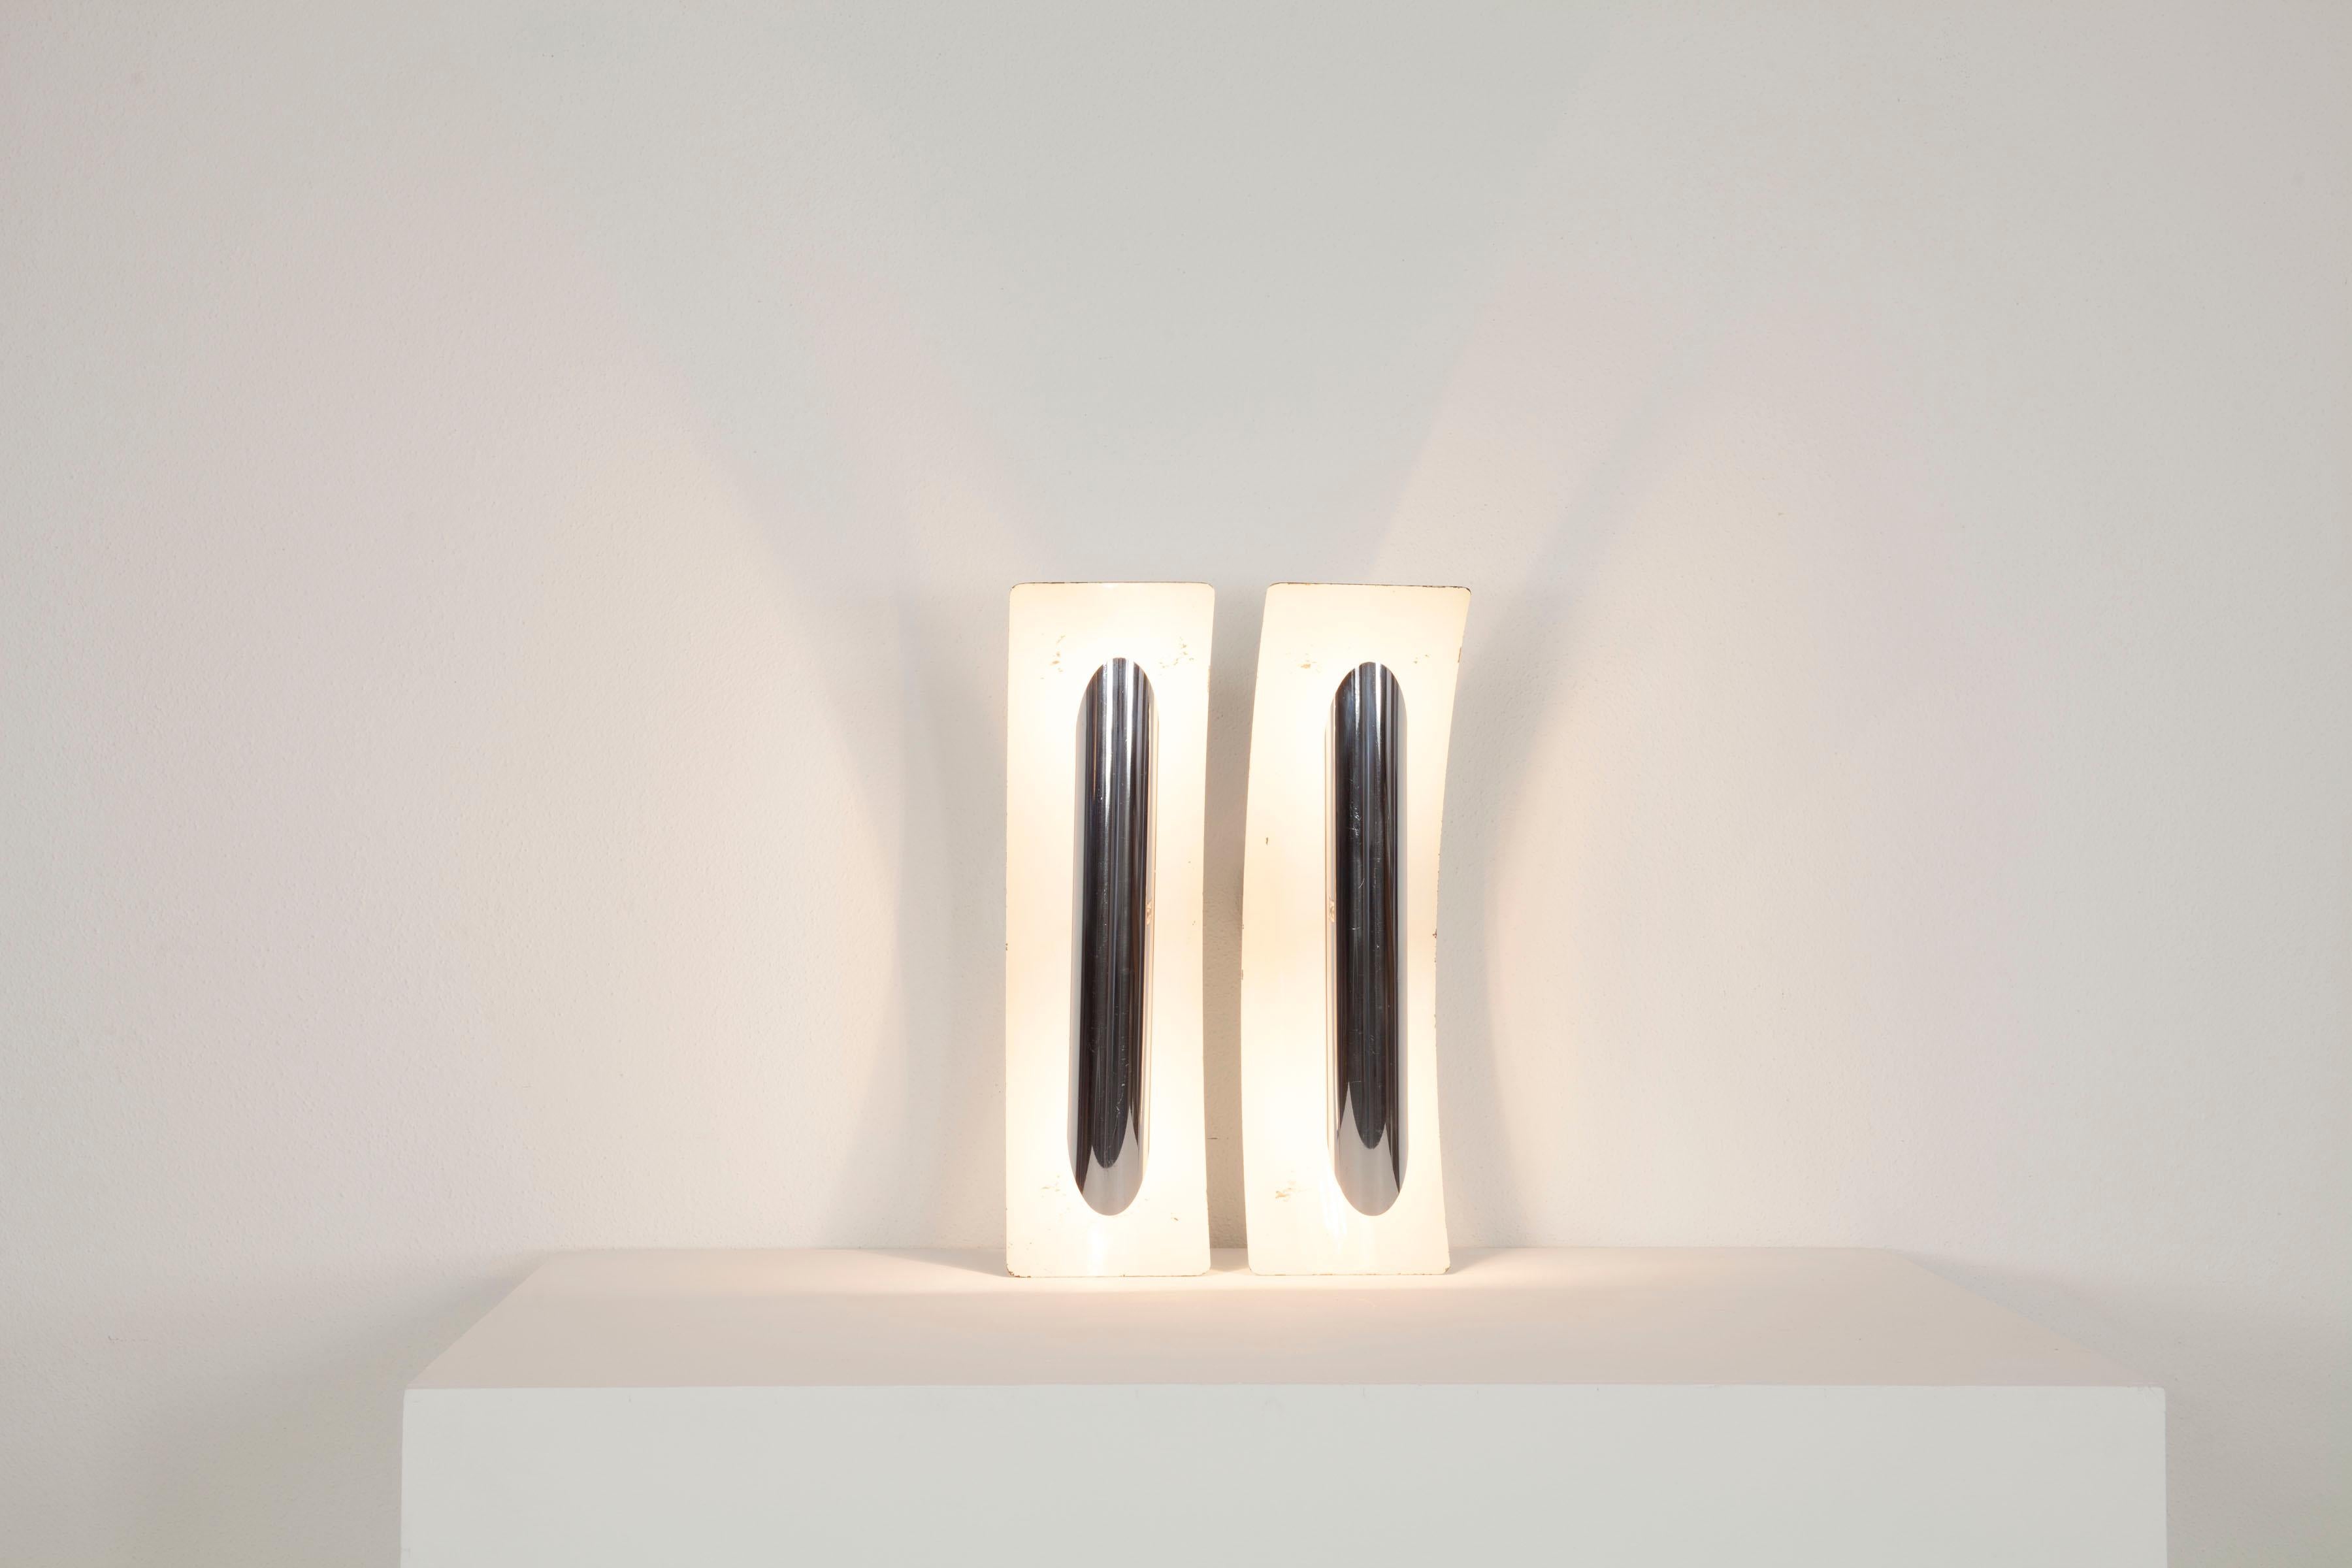  Set of 5 Wall Lamps, Design Gioffredo Reggiani, Italy 1970s  For Sale 2